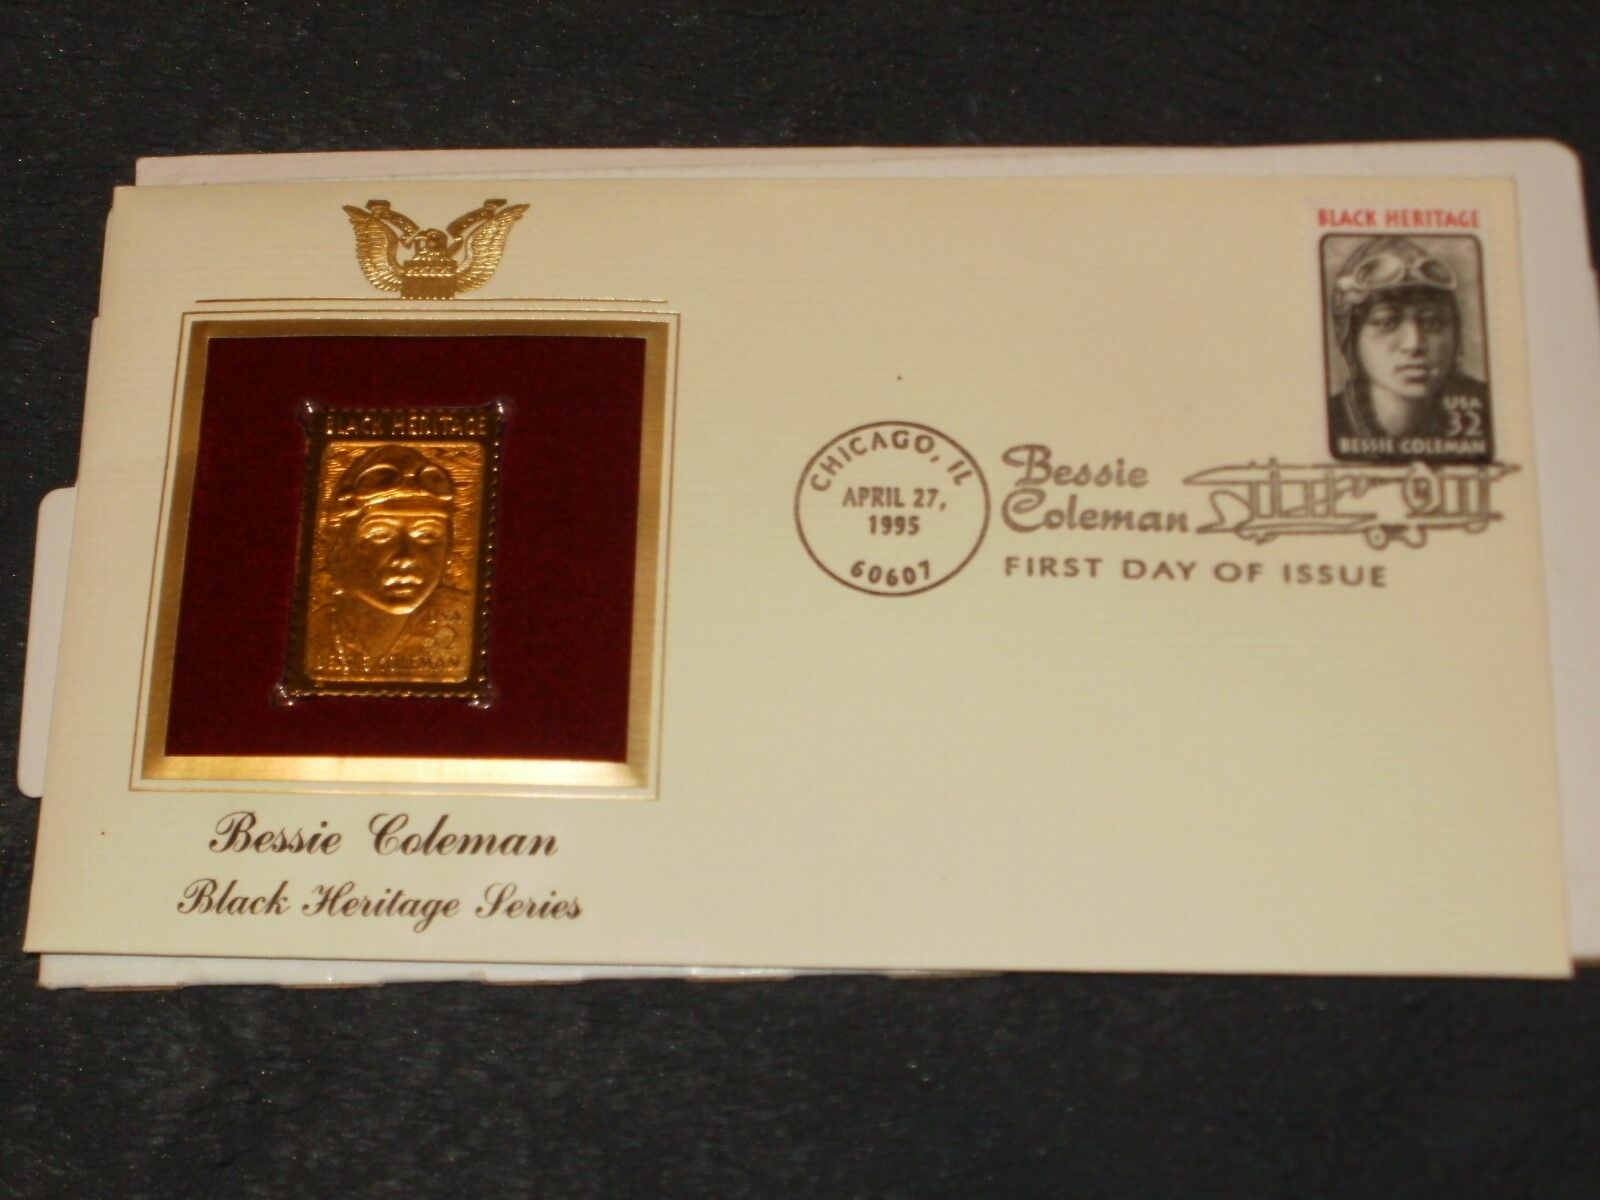 Bessie Coleman Airplane Pilot First Day Issue Commemorative Envelope ...